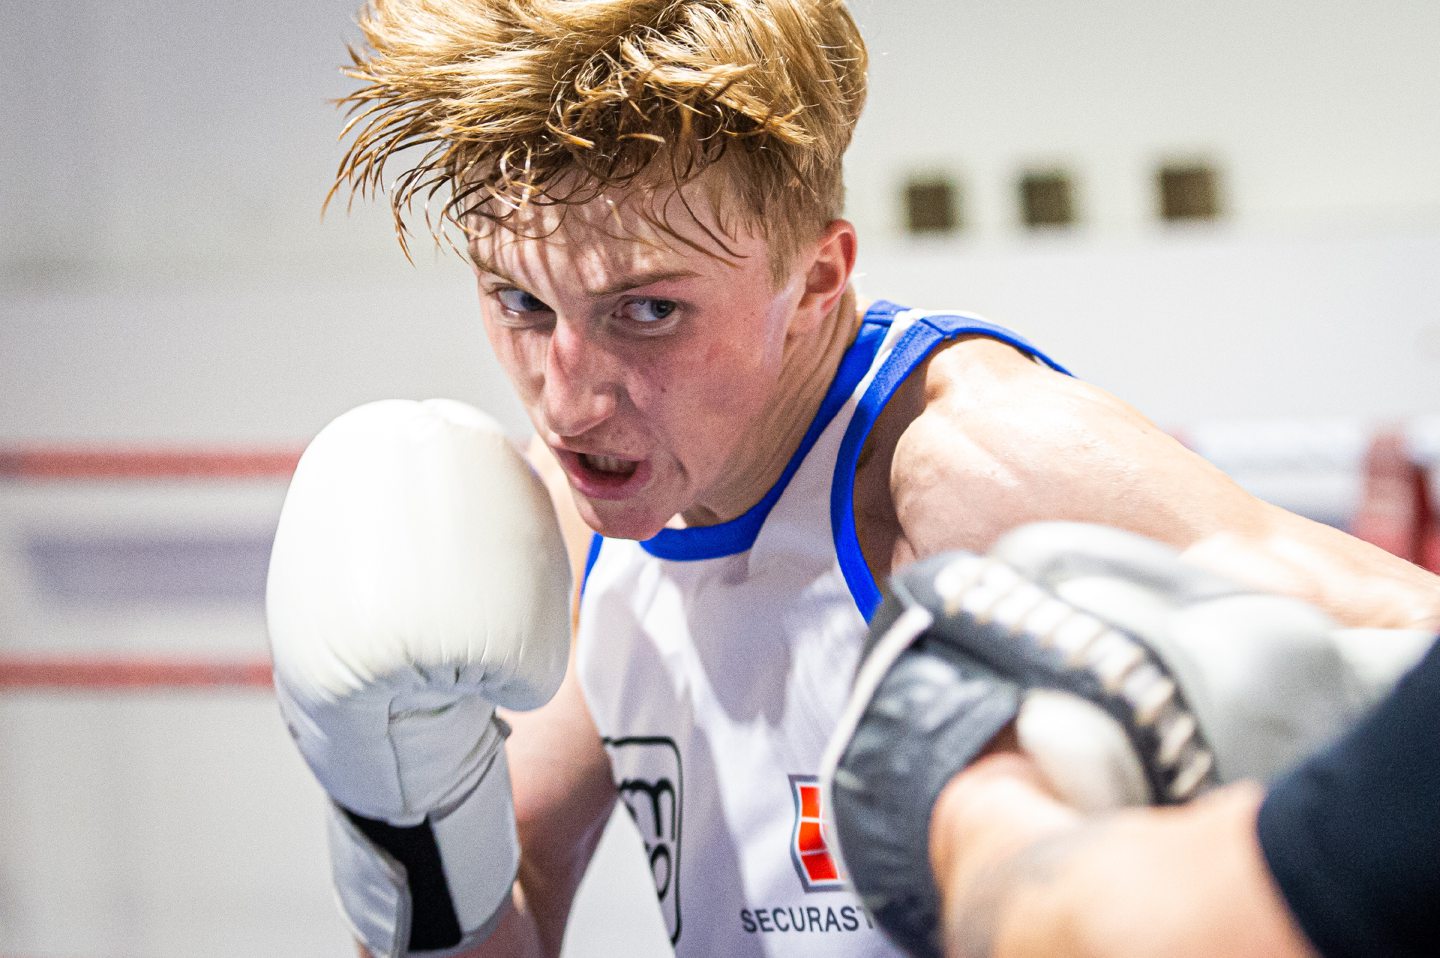 Aberdeen boxer Gregor McPherson will make his professional debut on Saturday night. Image: Wullie Marr/DC Thomson